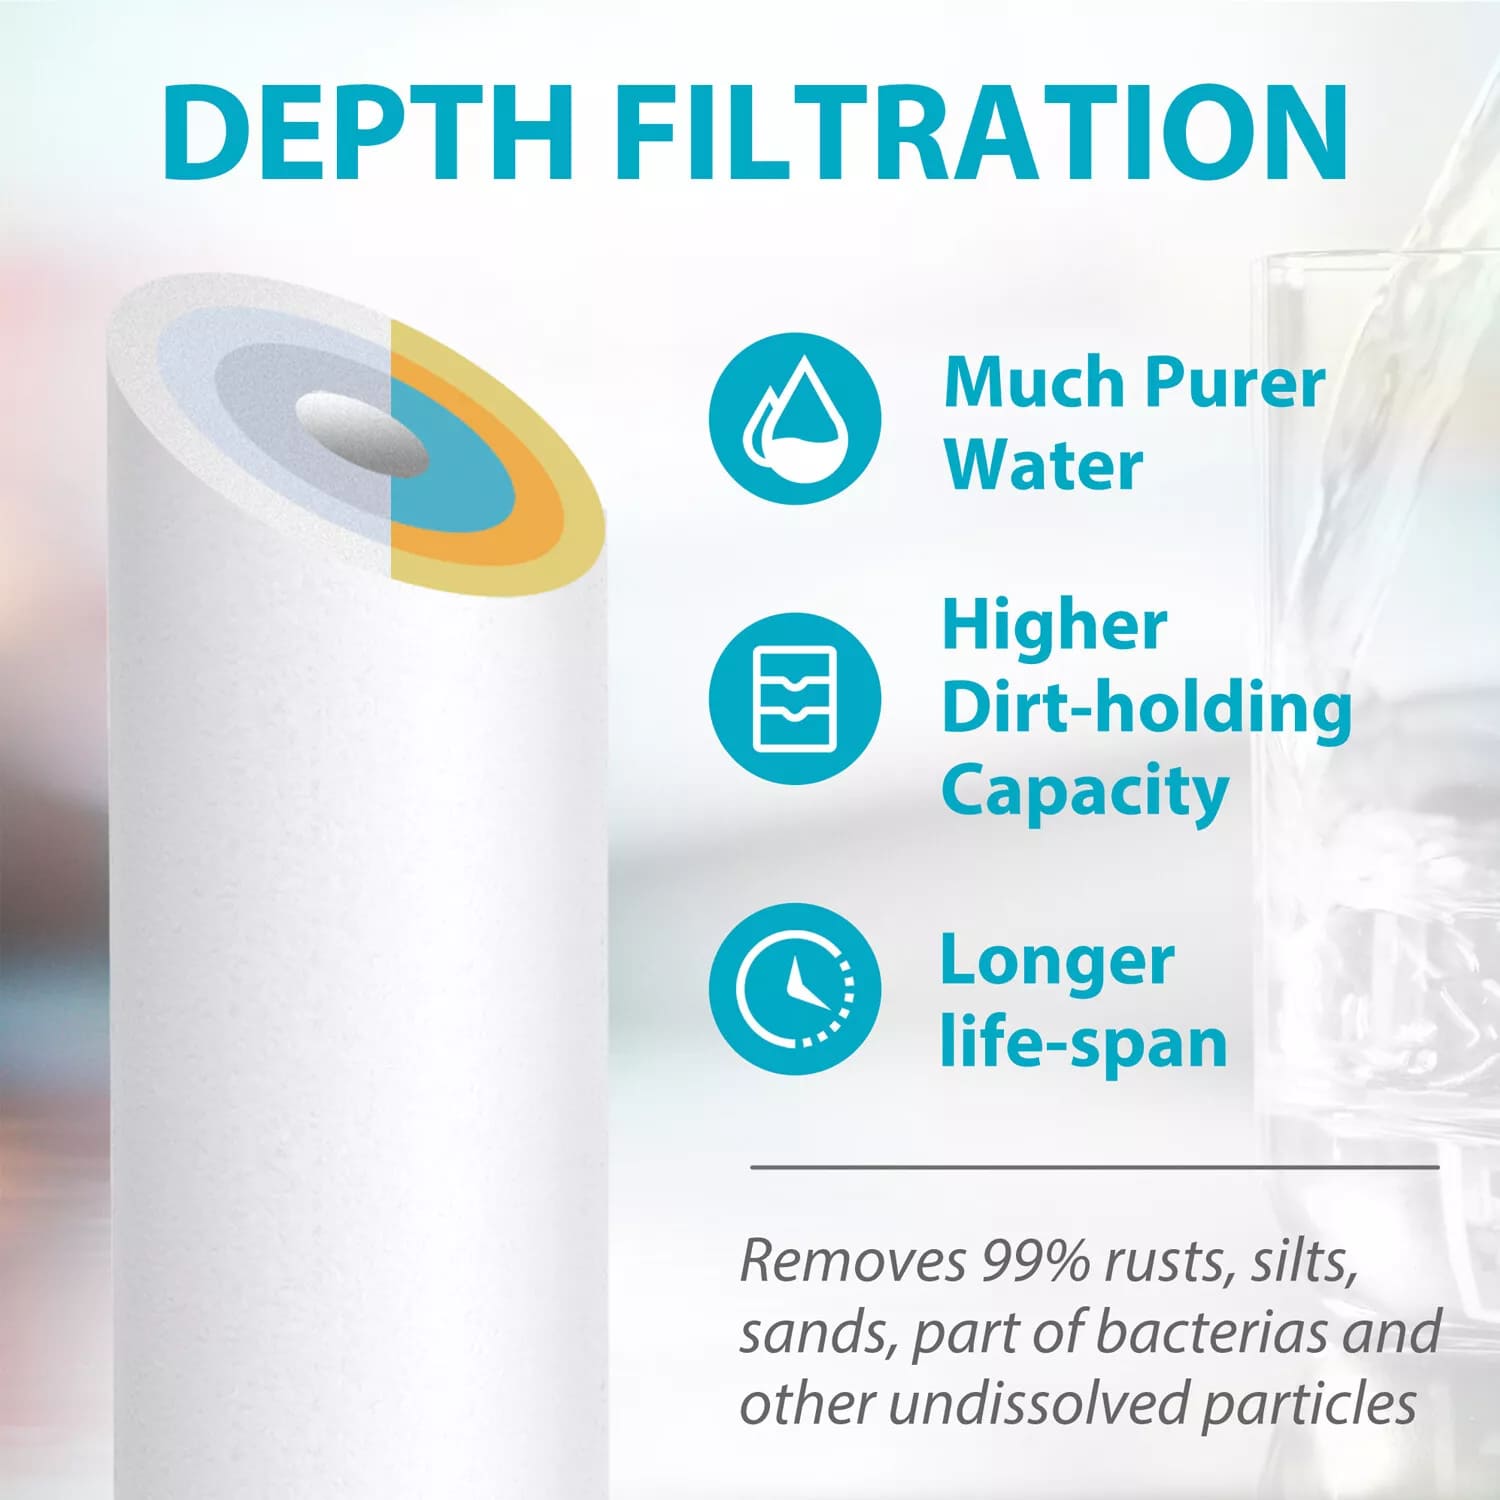 Membrane Solutions 10" x 2.5" Whole House 5 Micron PP Sediment Water Filter Replacement Cartridge